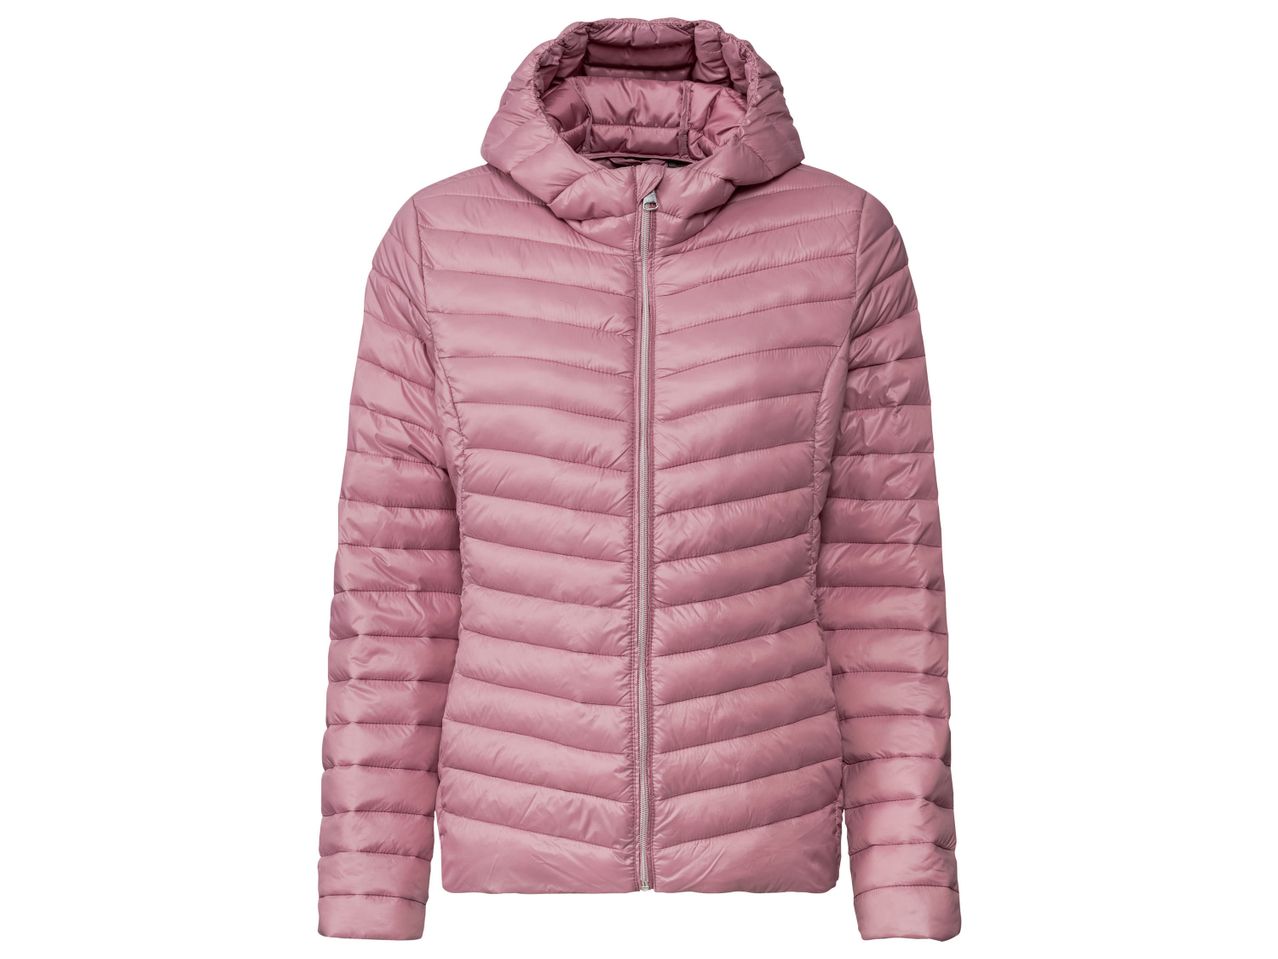 Go to full screen view: Ladies’ Lightweight Jacket - Image 1